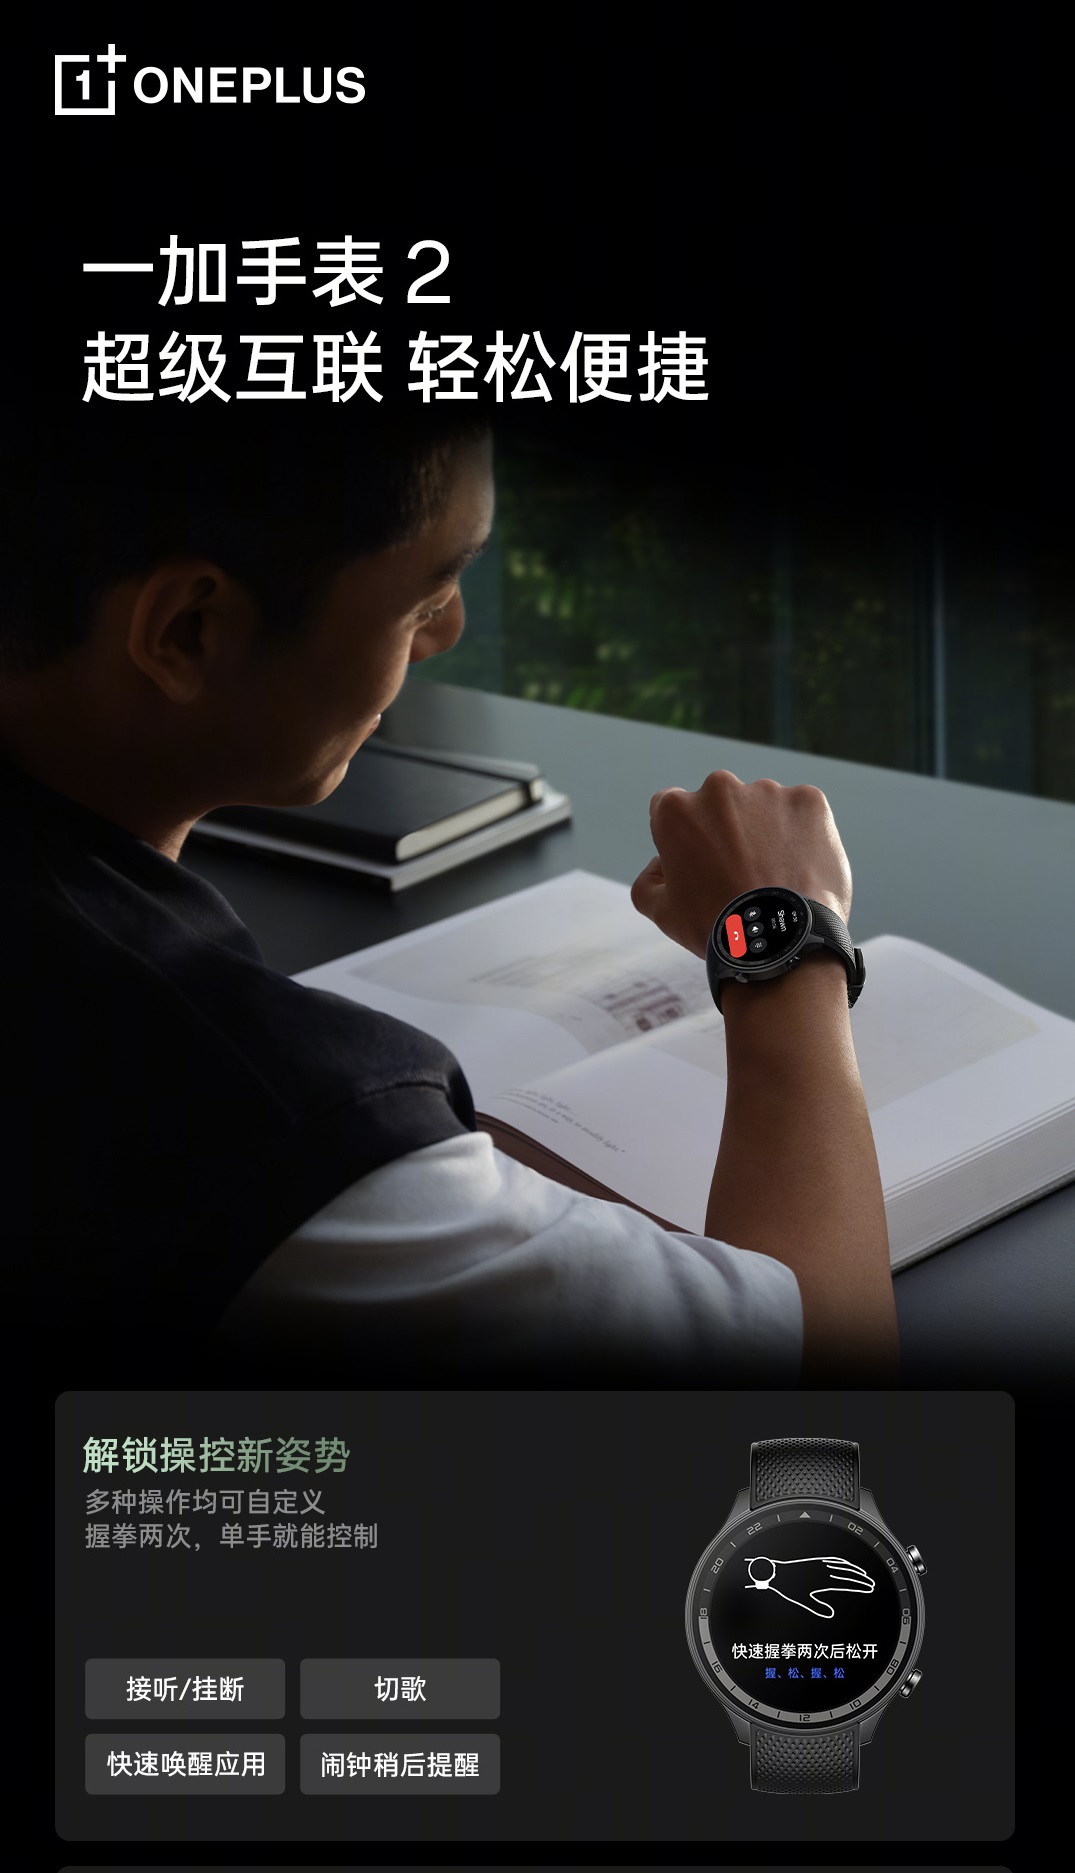 Promotional material for a new OnePlus watch called OnePlus Watch 2 in China. The image shows a man looking at the watch on his right wrist.